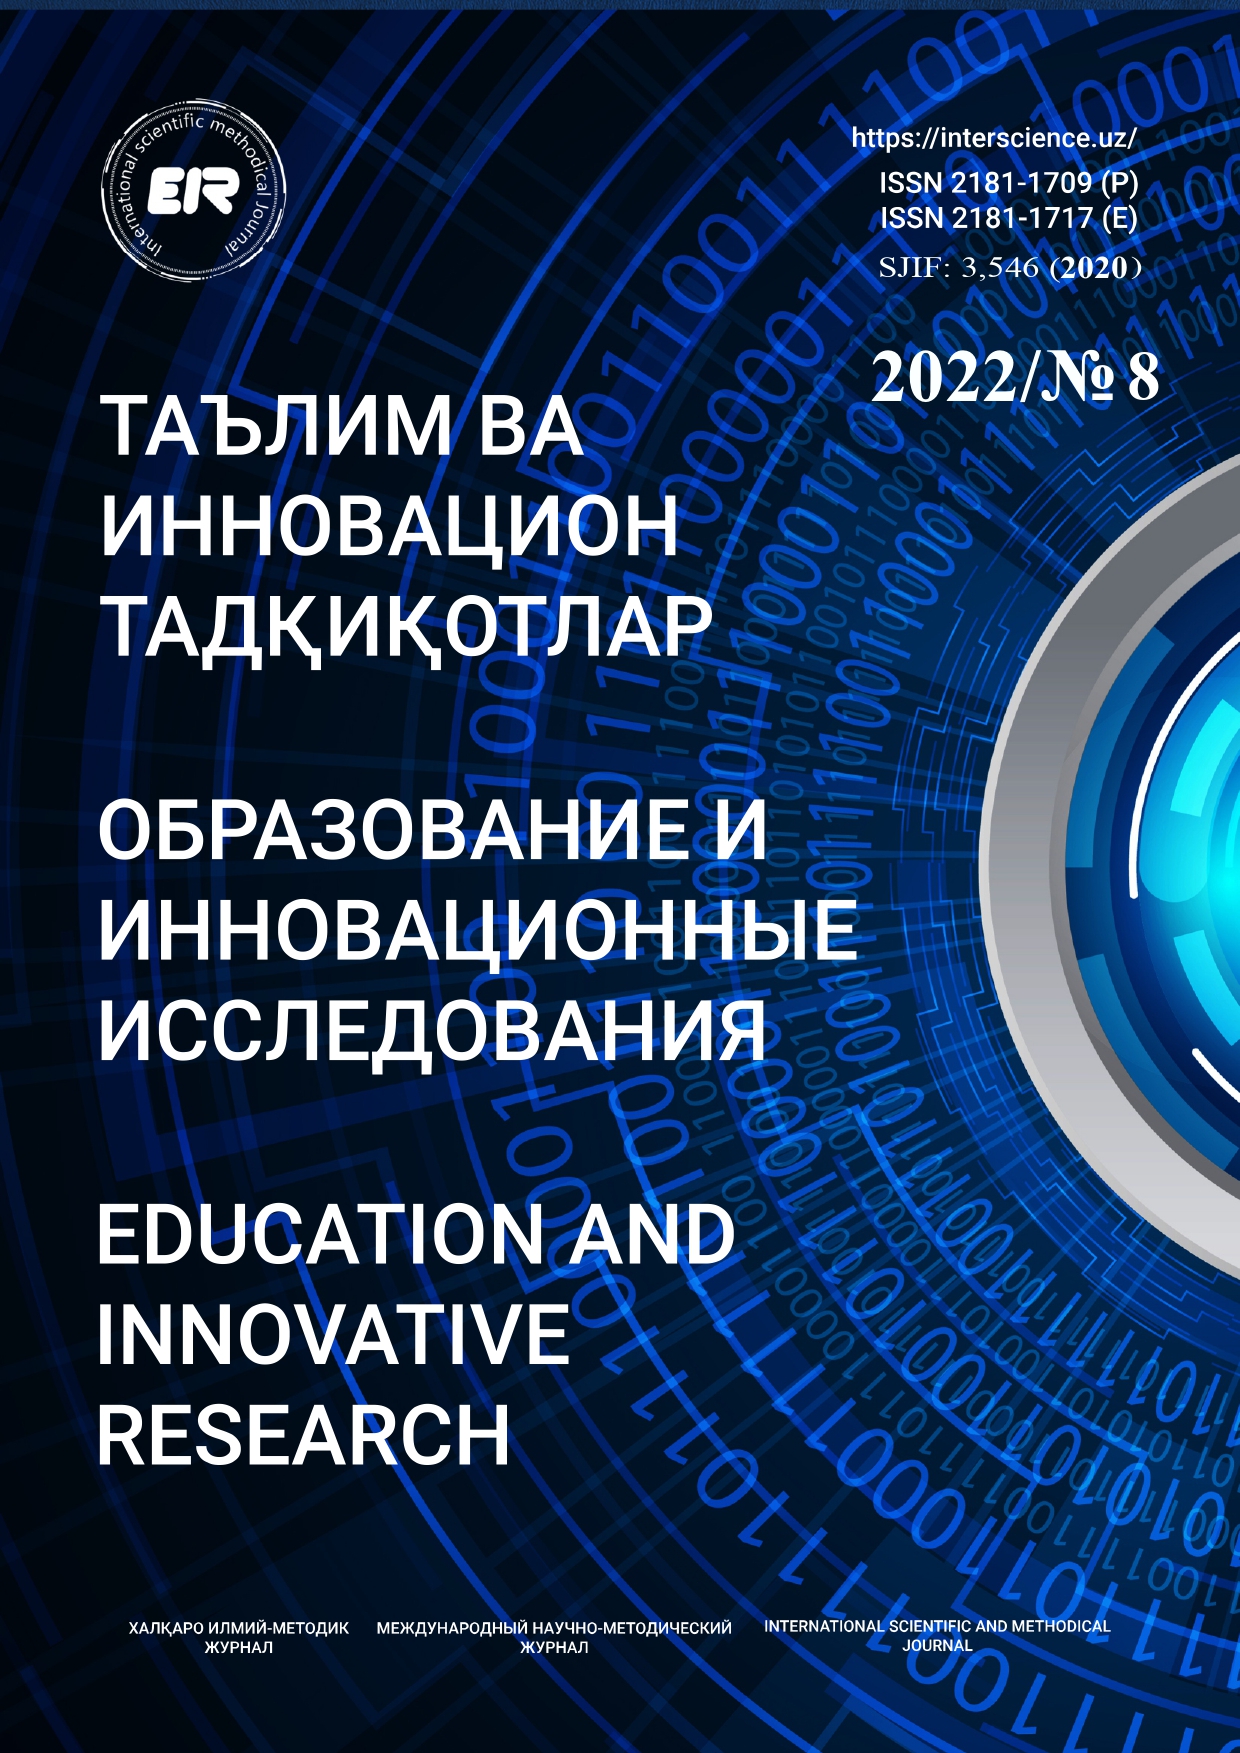 					View No. 8 (2022): International Scientific and Methodological Journal of Education and Innovation Research
				